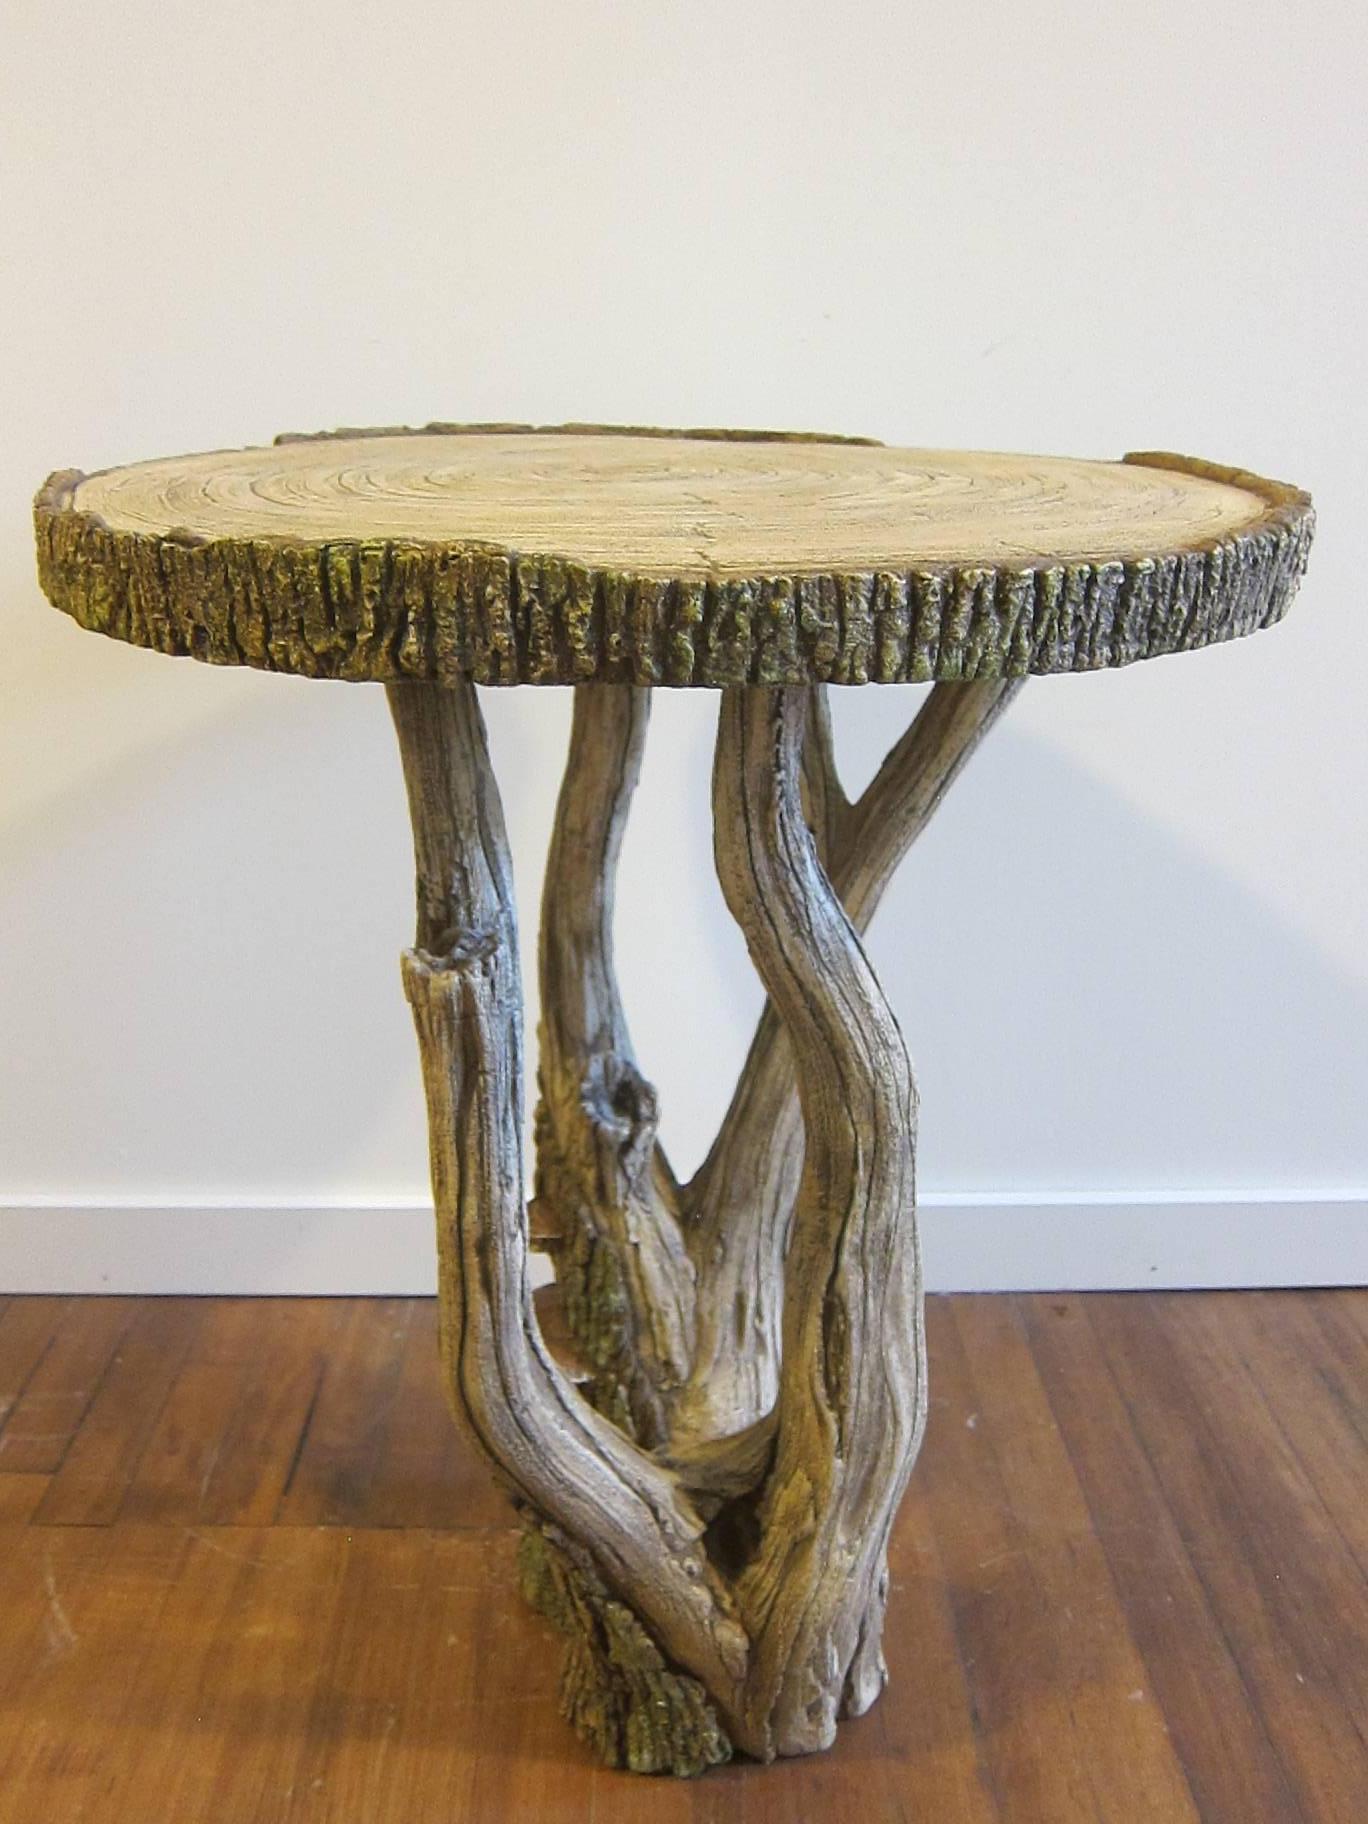 Suzy Ventura handcrafted stone table. Built on a steel frame using a special cement aggregate designed, formed, and crafted by hand. A one of a kind piece made to last a lifetime inside or outside. Top of the table is designed for water run off.